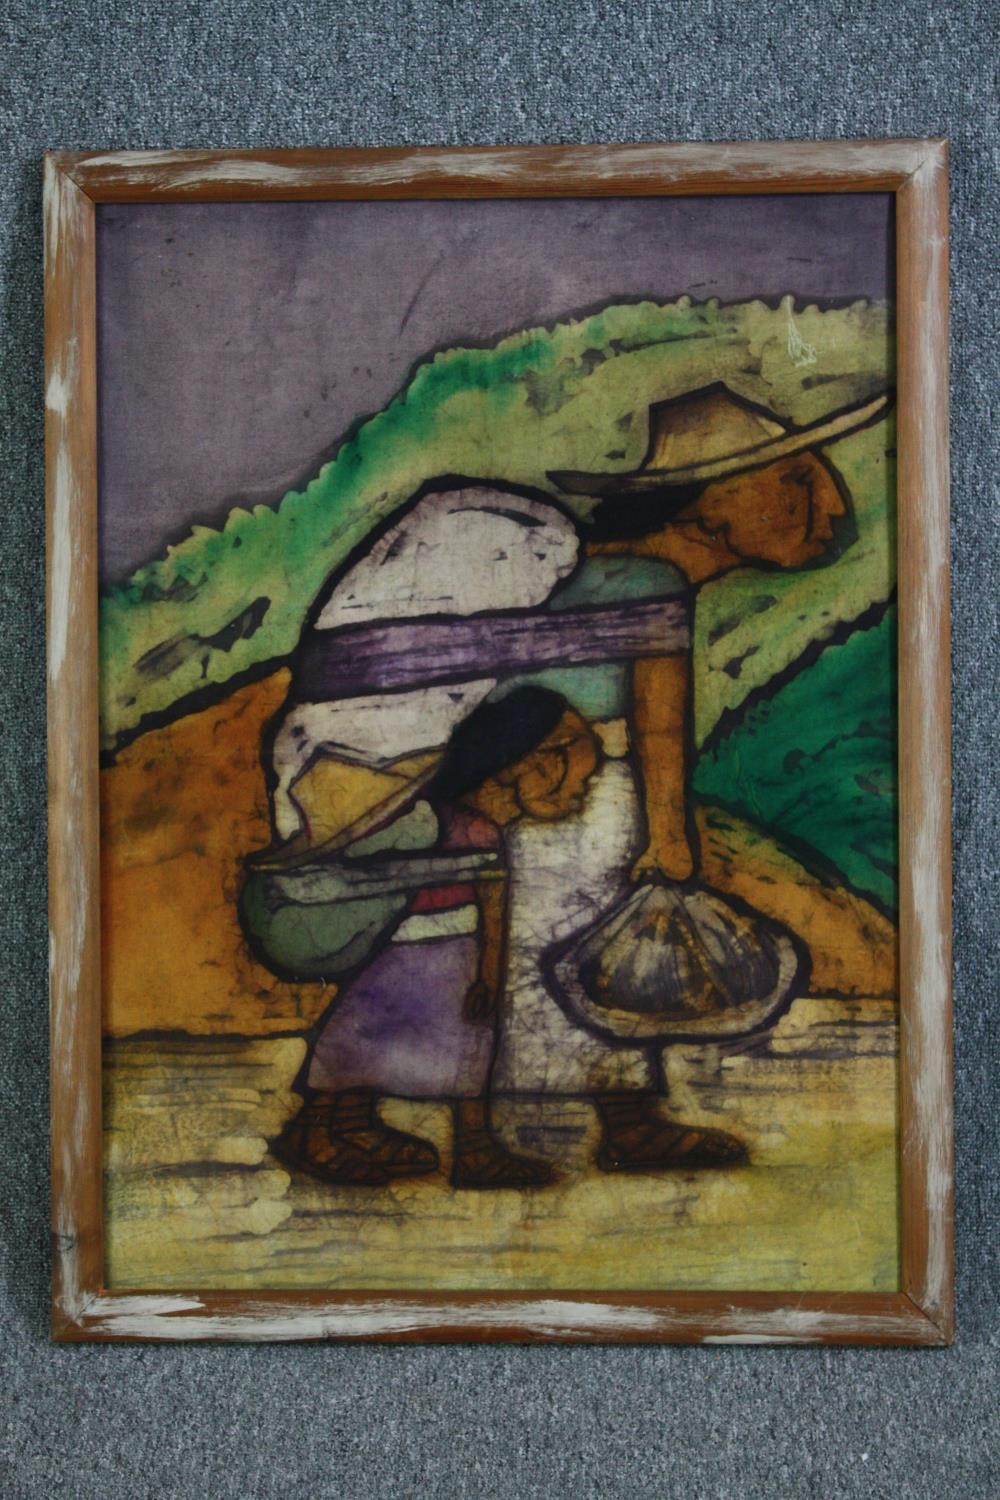 Watercolour painting on fabric. Unsigned. Framed. H.95 W.70 cm. - Image 2 of 3